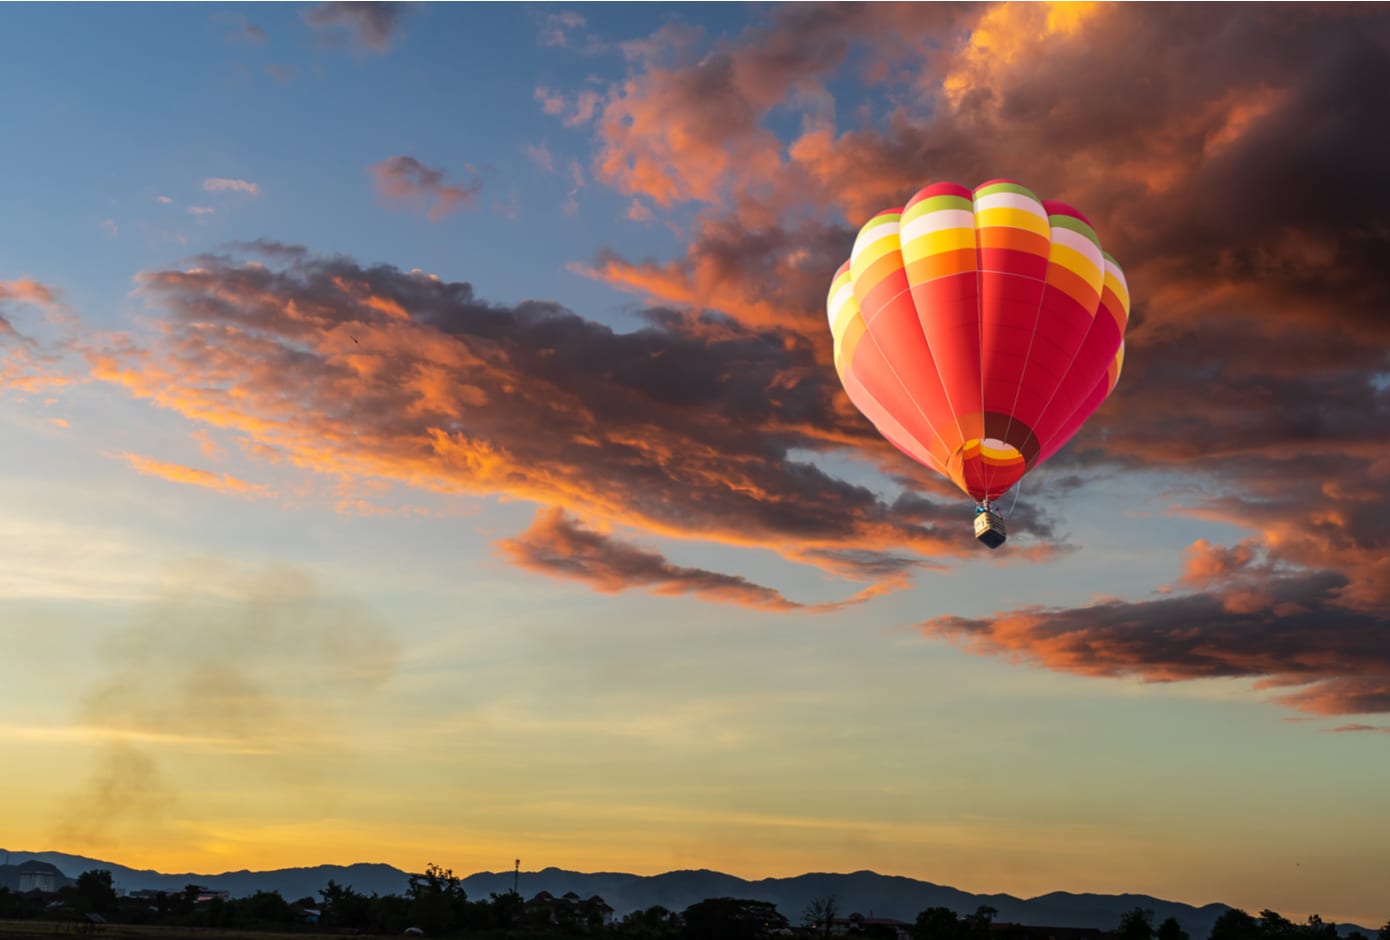 An orange and yellow hot air flying at sunset time. balloon